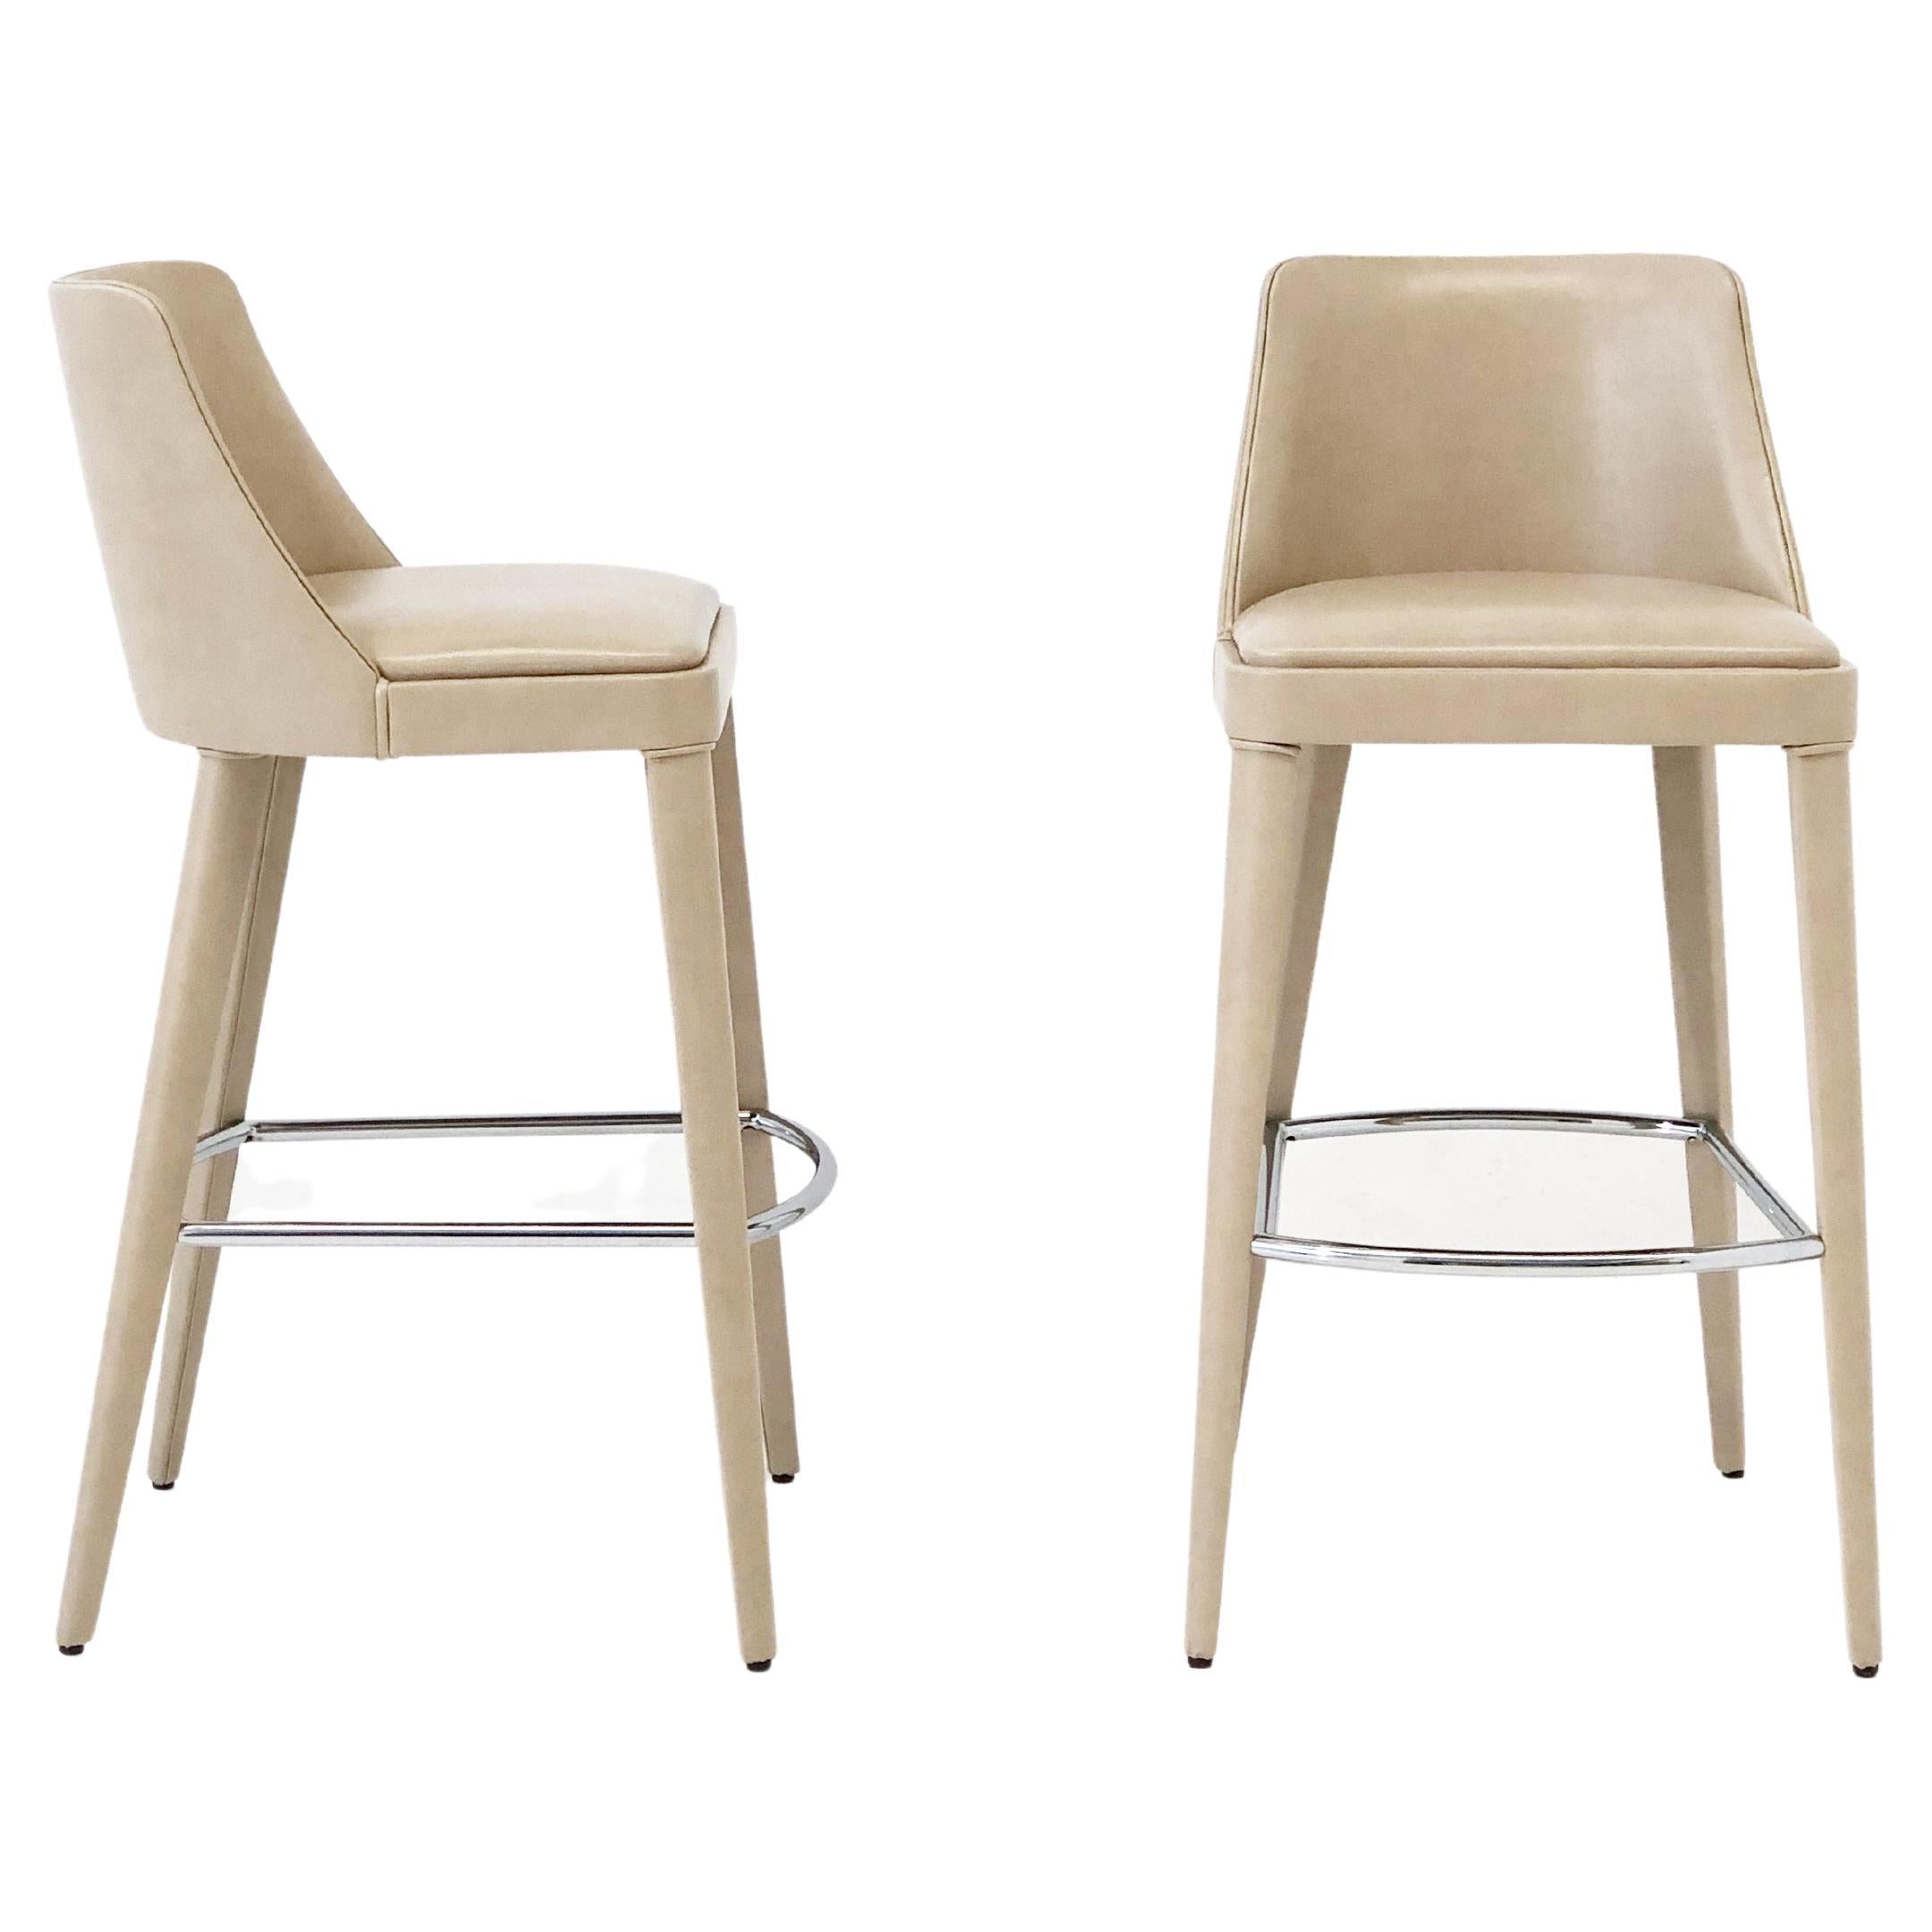 Lola, the Super Comfortable Stool in leather For Sale